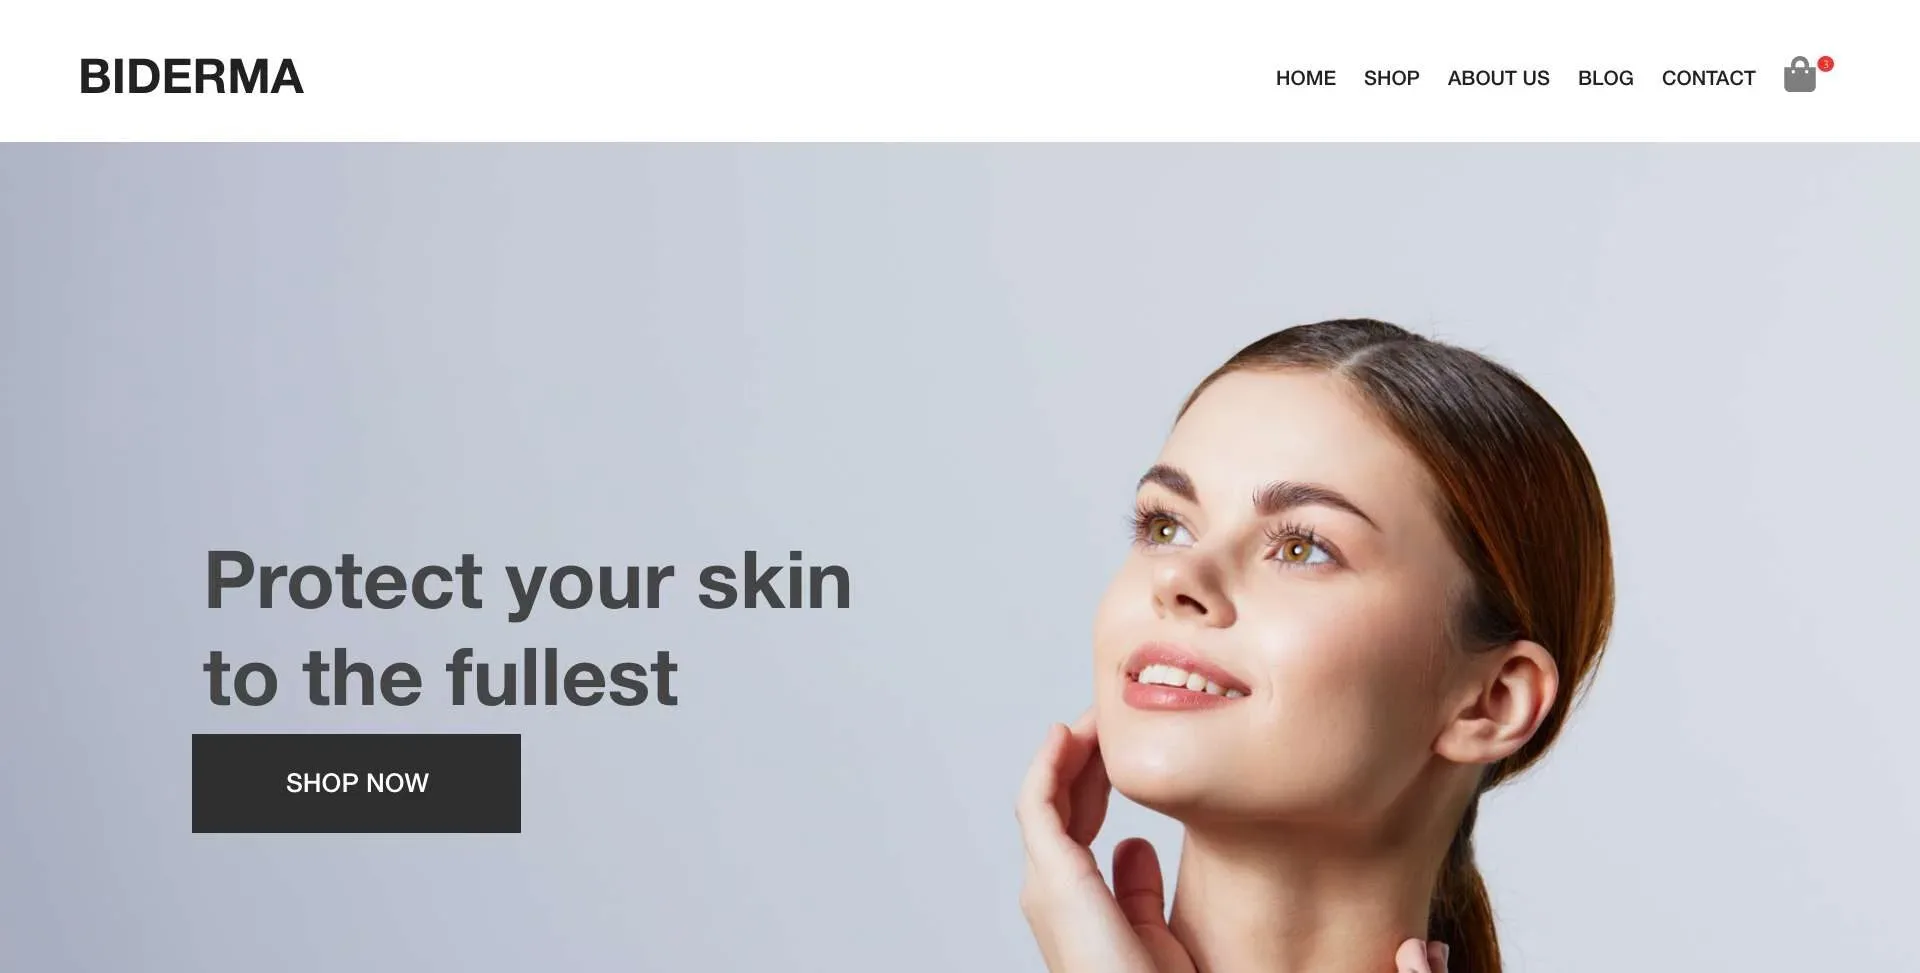 Skincare & Face Products store expert shopify consulting services